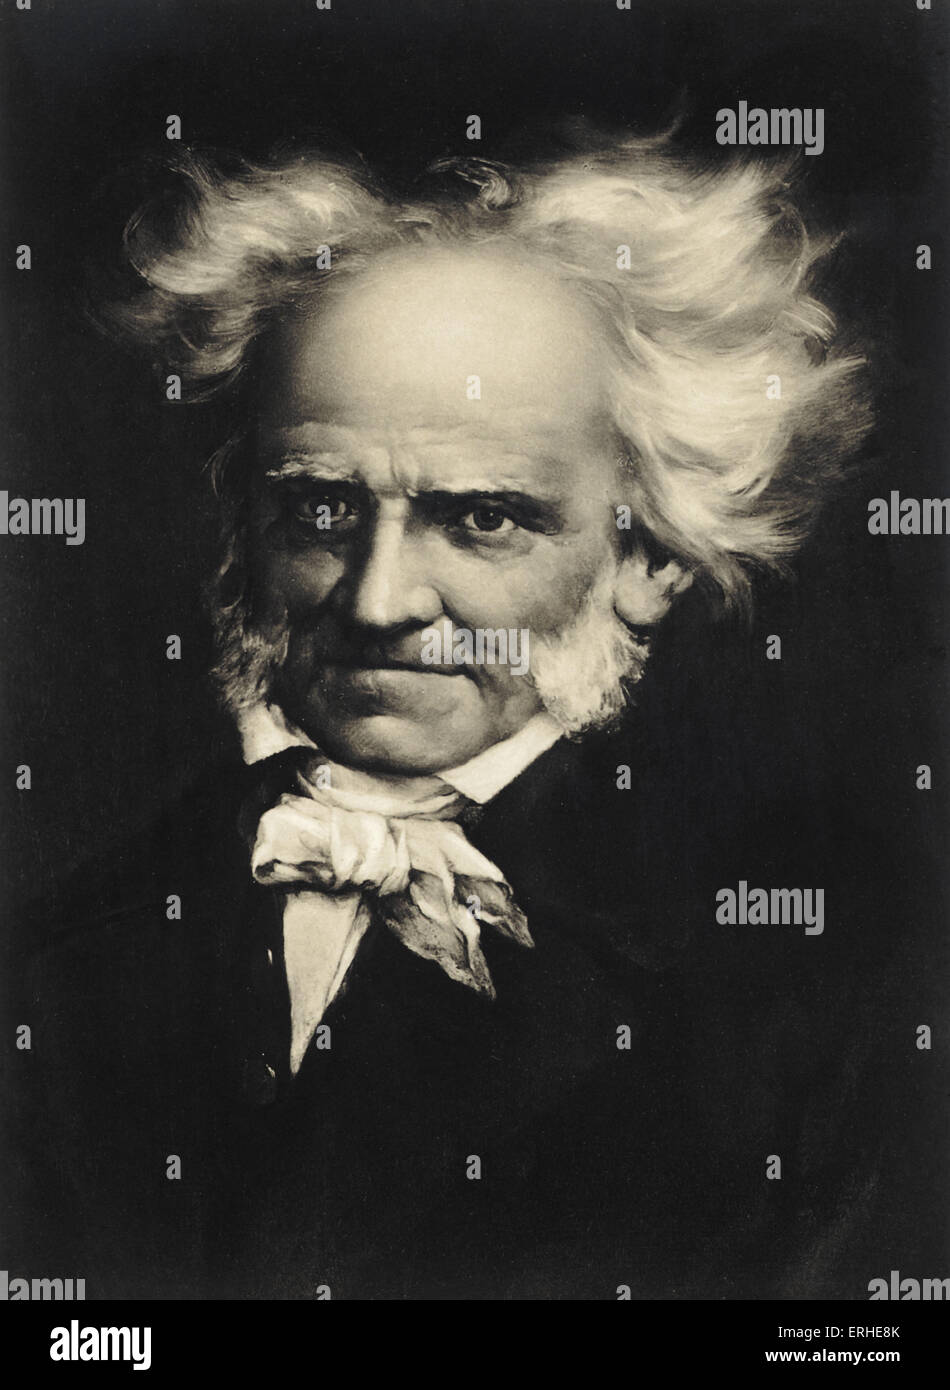 Arthur Schopenhauer, portrait - German philosopher, 22 February 1788 - 21 September 1860 - Wagner was influenced by his Stock Photo